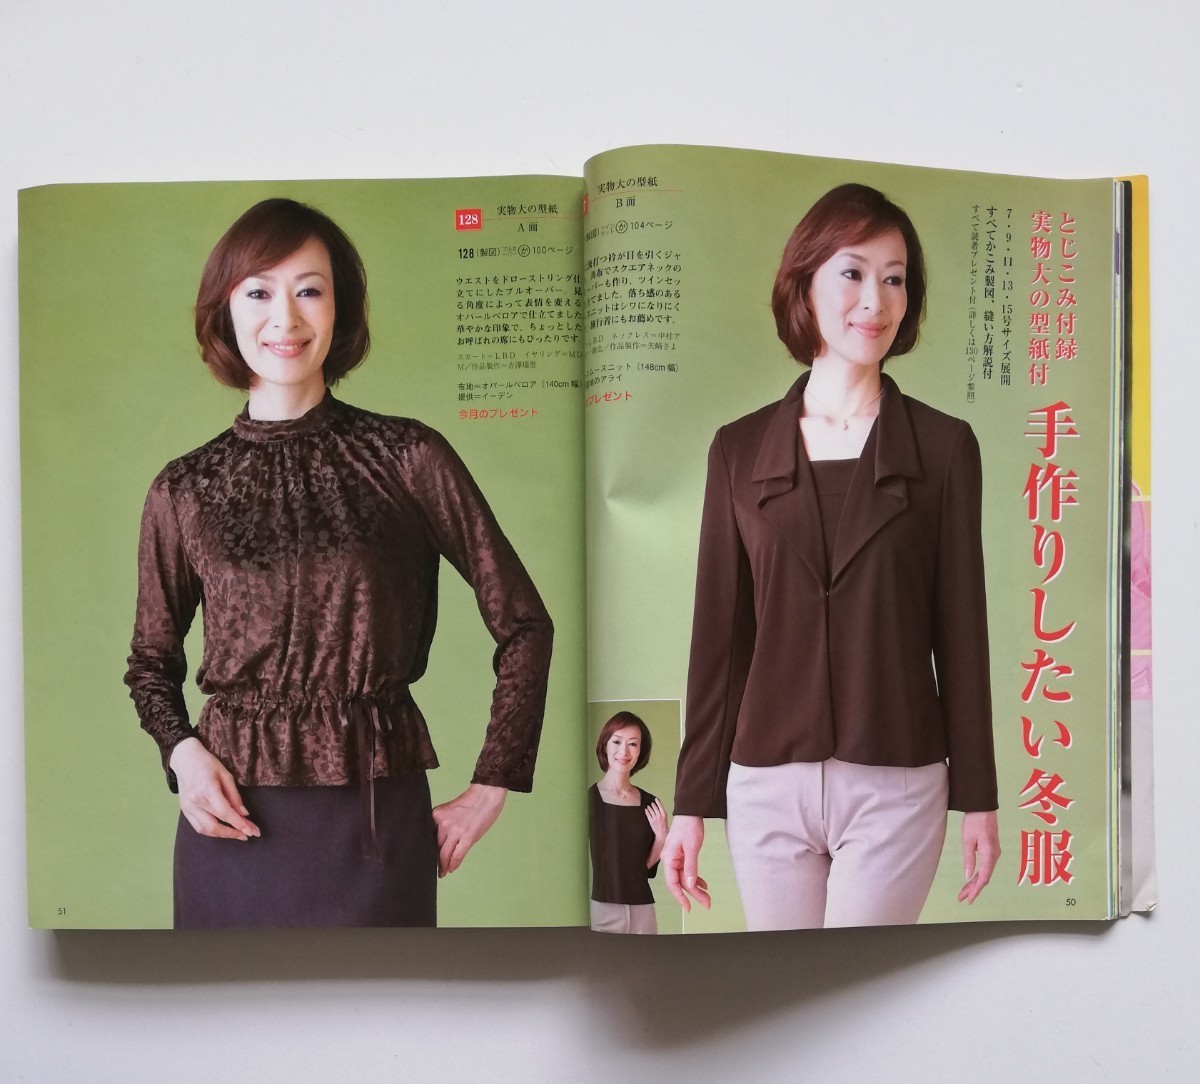 b13.retibtik2010/12 winter easy sewing Home wear & warm goods another... 2010 year 11 month 7 day issue 